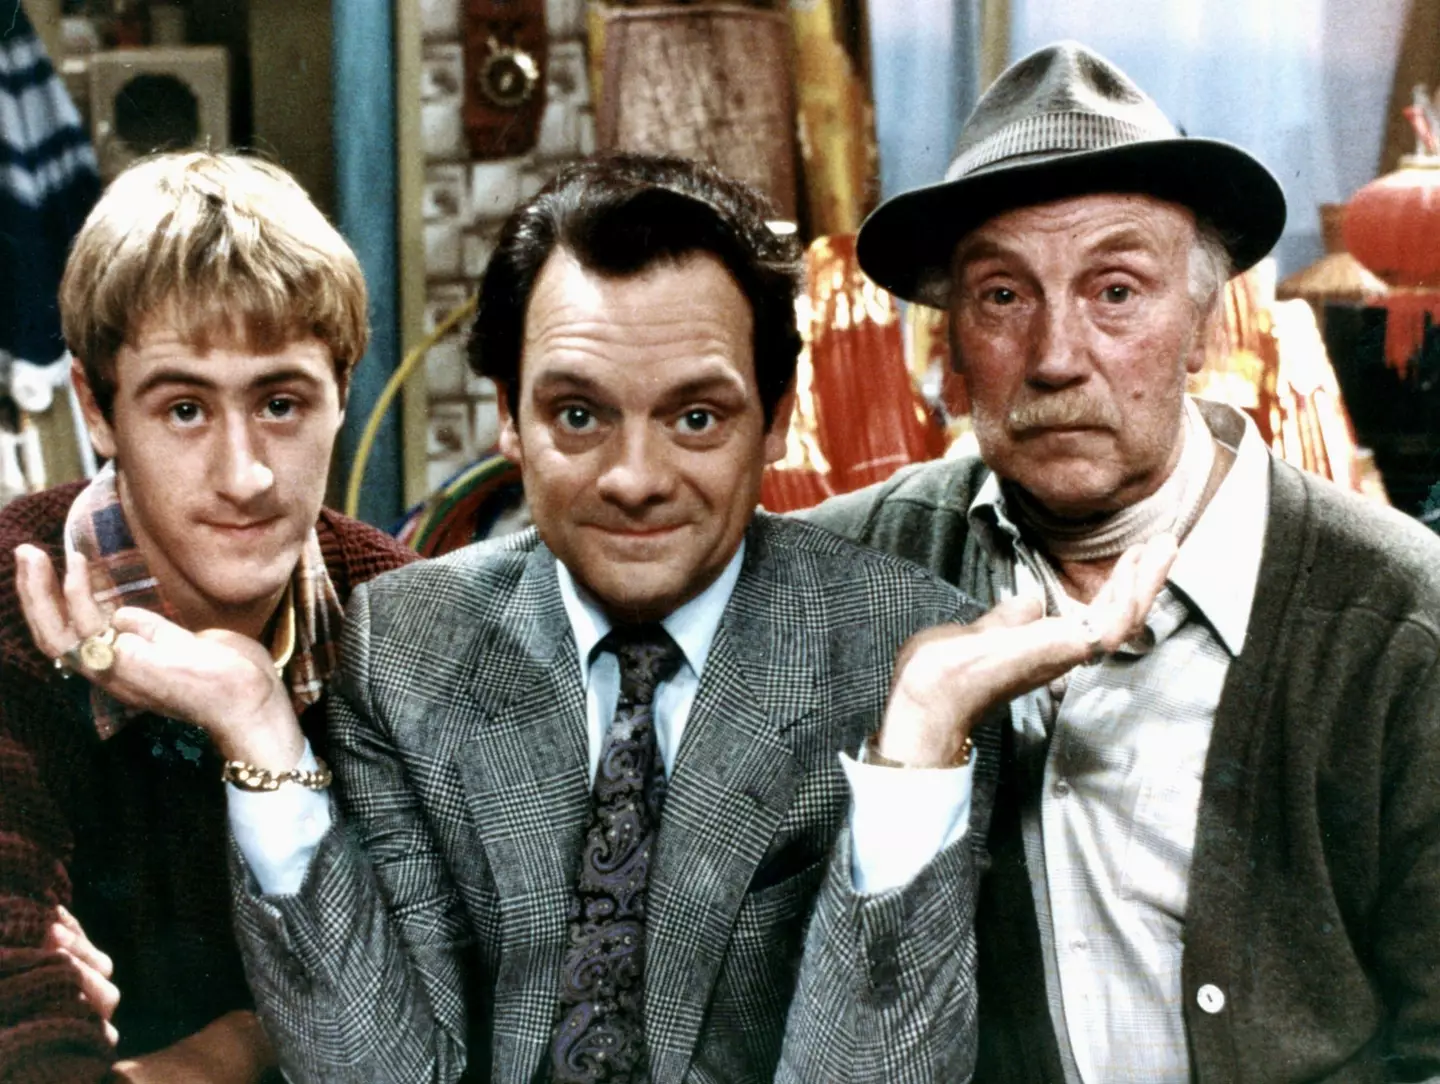 The actor is best known for the role of Derek 'Del Boy' Trotter in the BBC sitcom Only Fools and Horses.